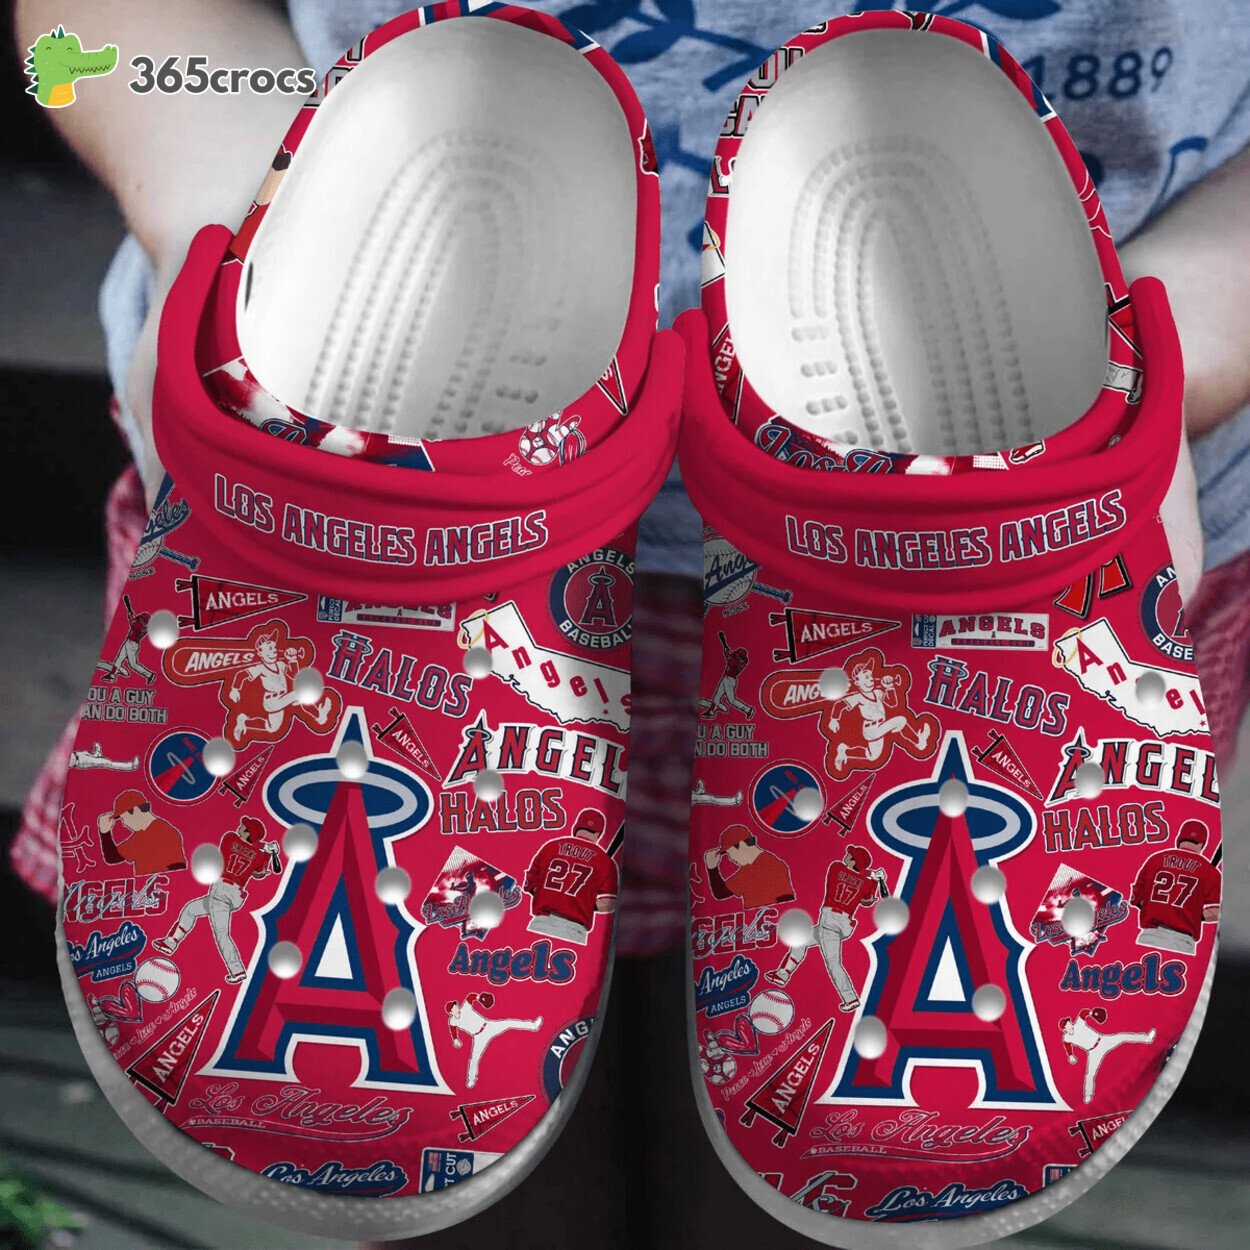 Los Angeles Angels of Anaheim Baseball team MLB Sport Crocss Clogs Shoes Comfortable